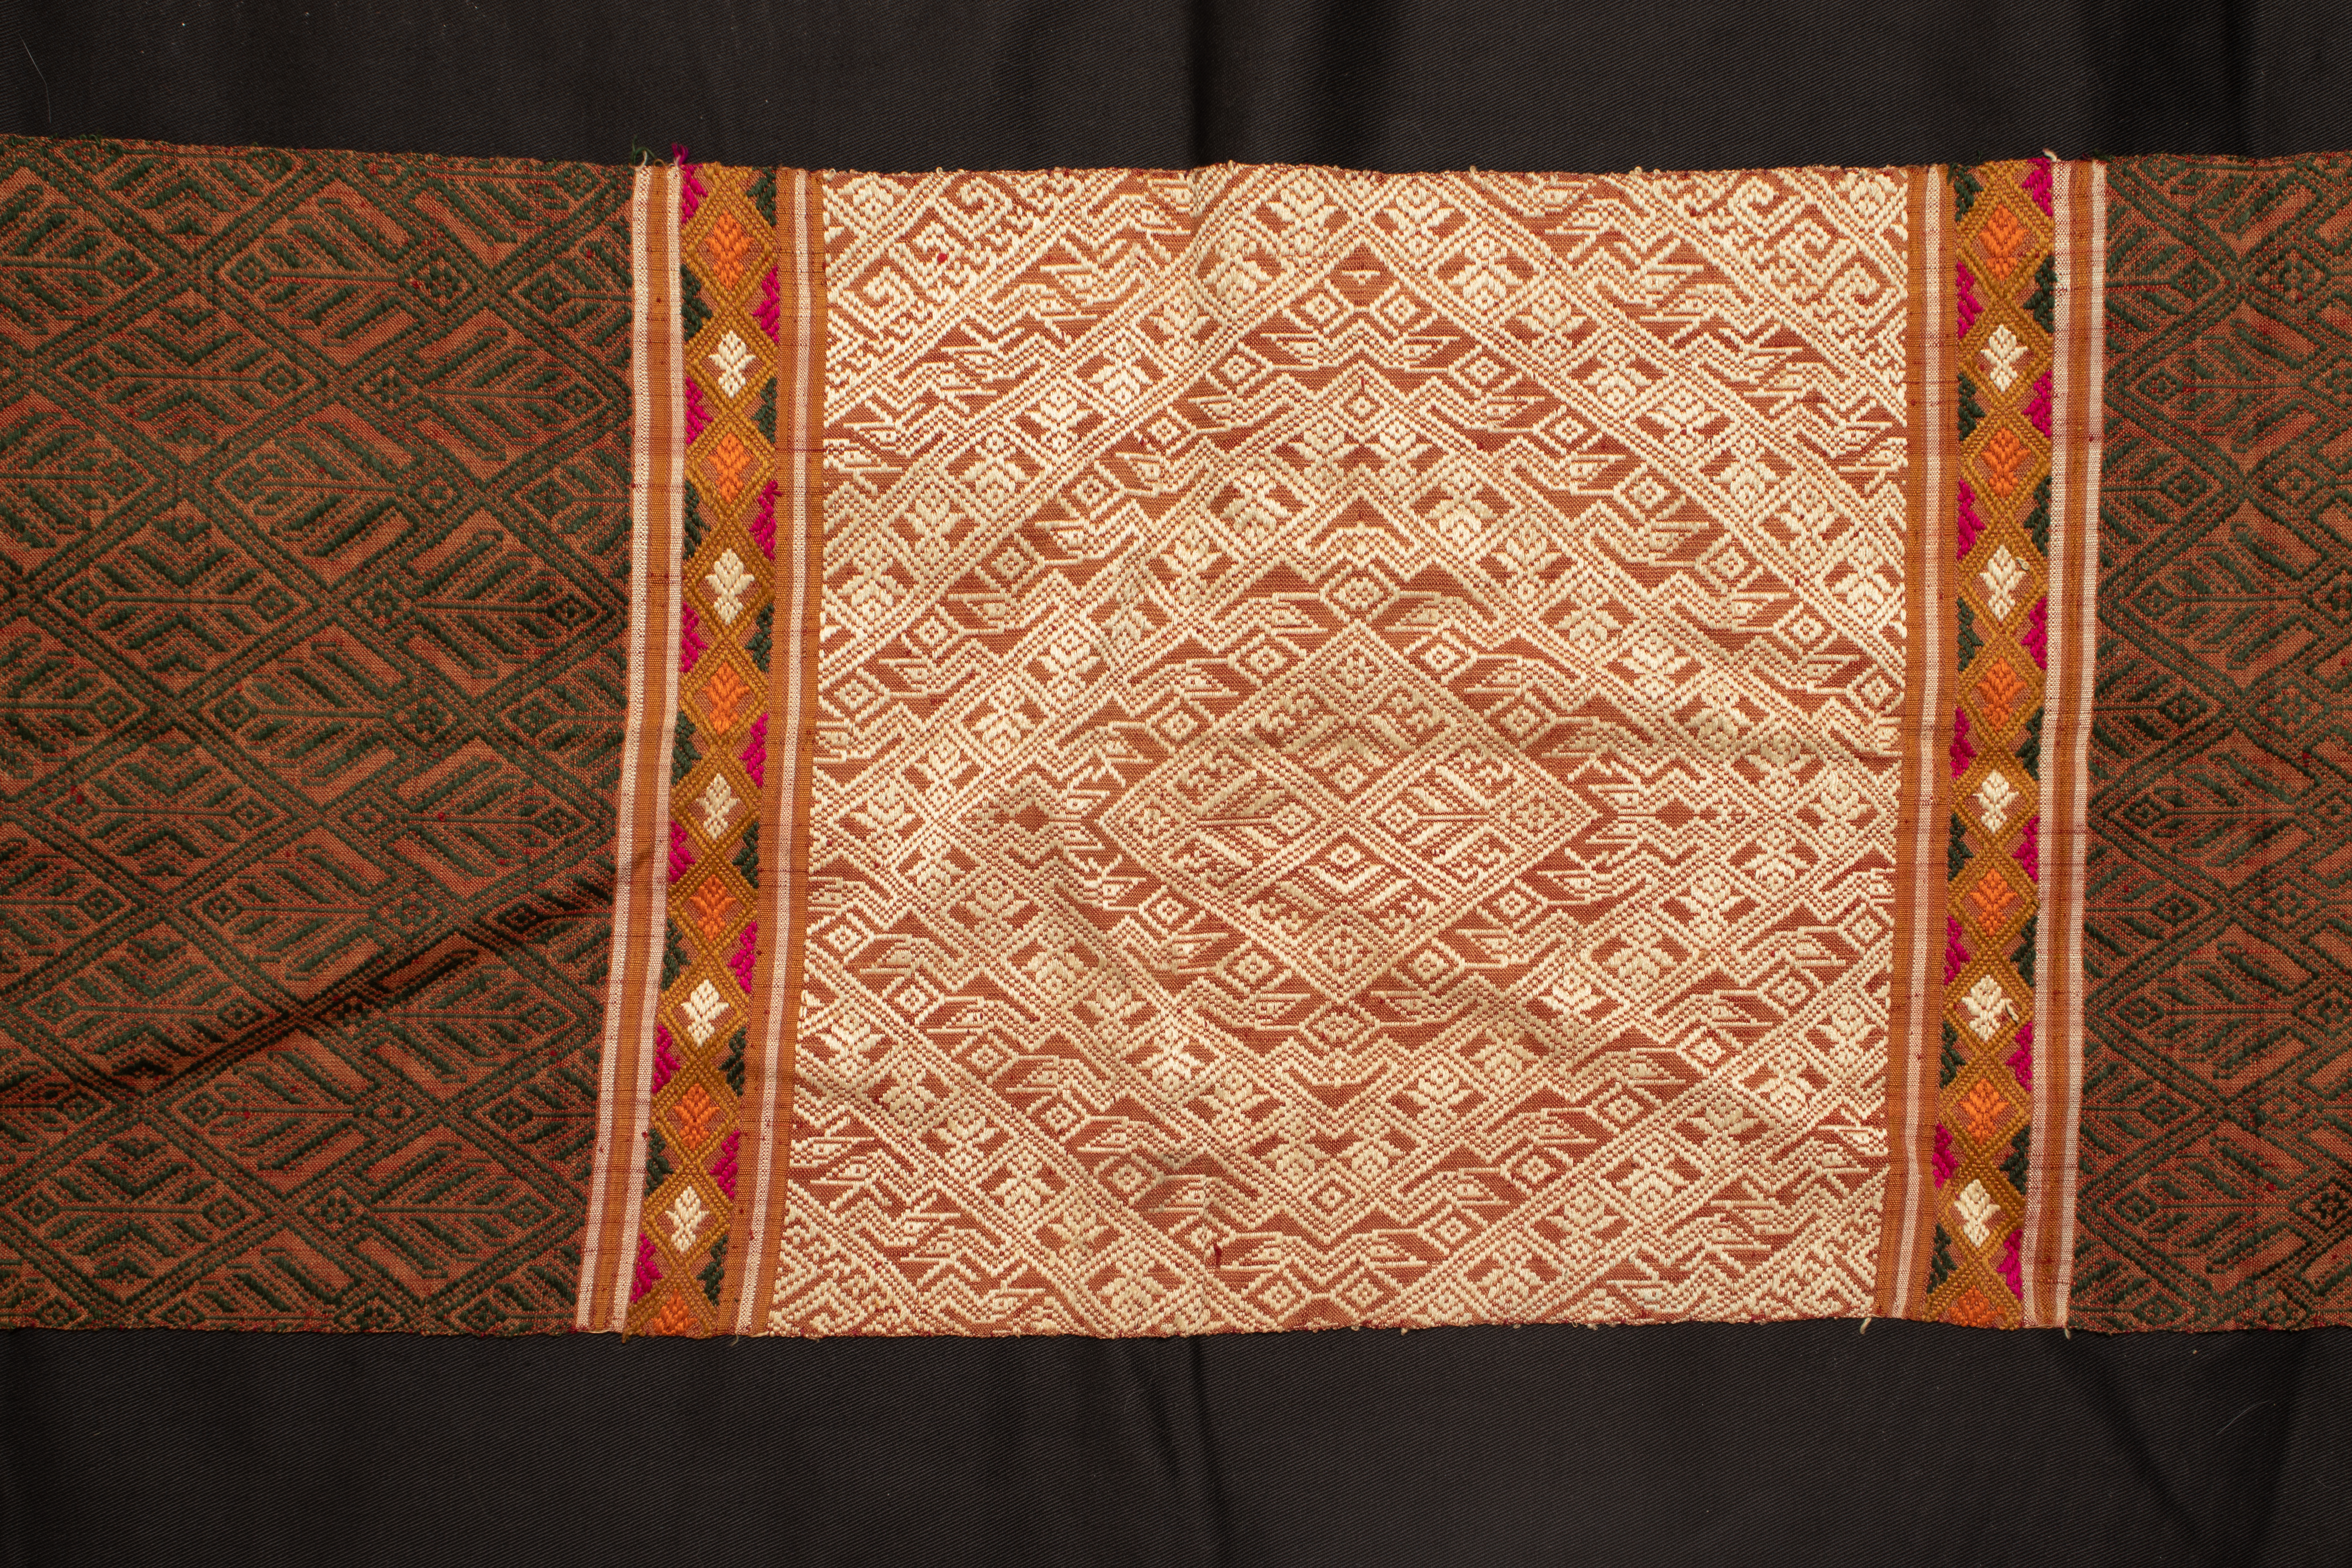 A TRADITIONAL LAOTIAN WOVEN DANCING SHAWL - Image 3 of 3